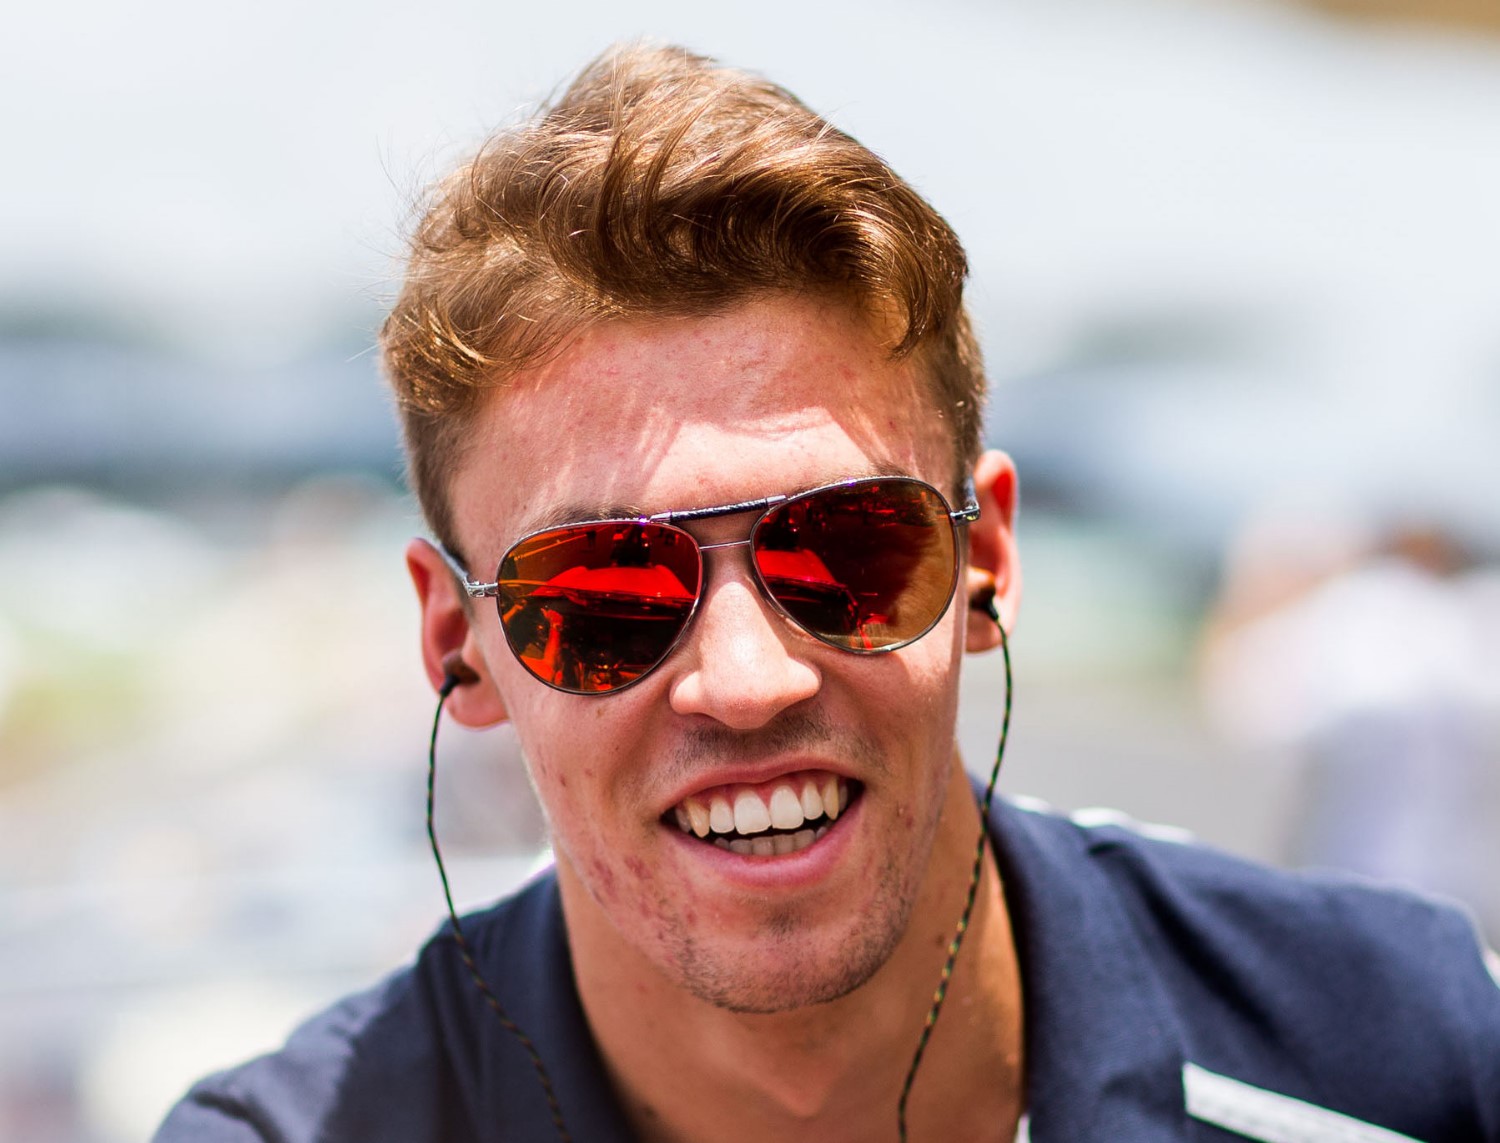 Kvyat must come with a very large check